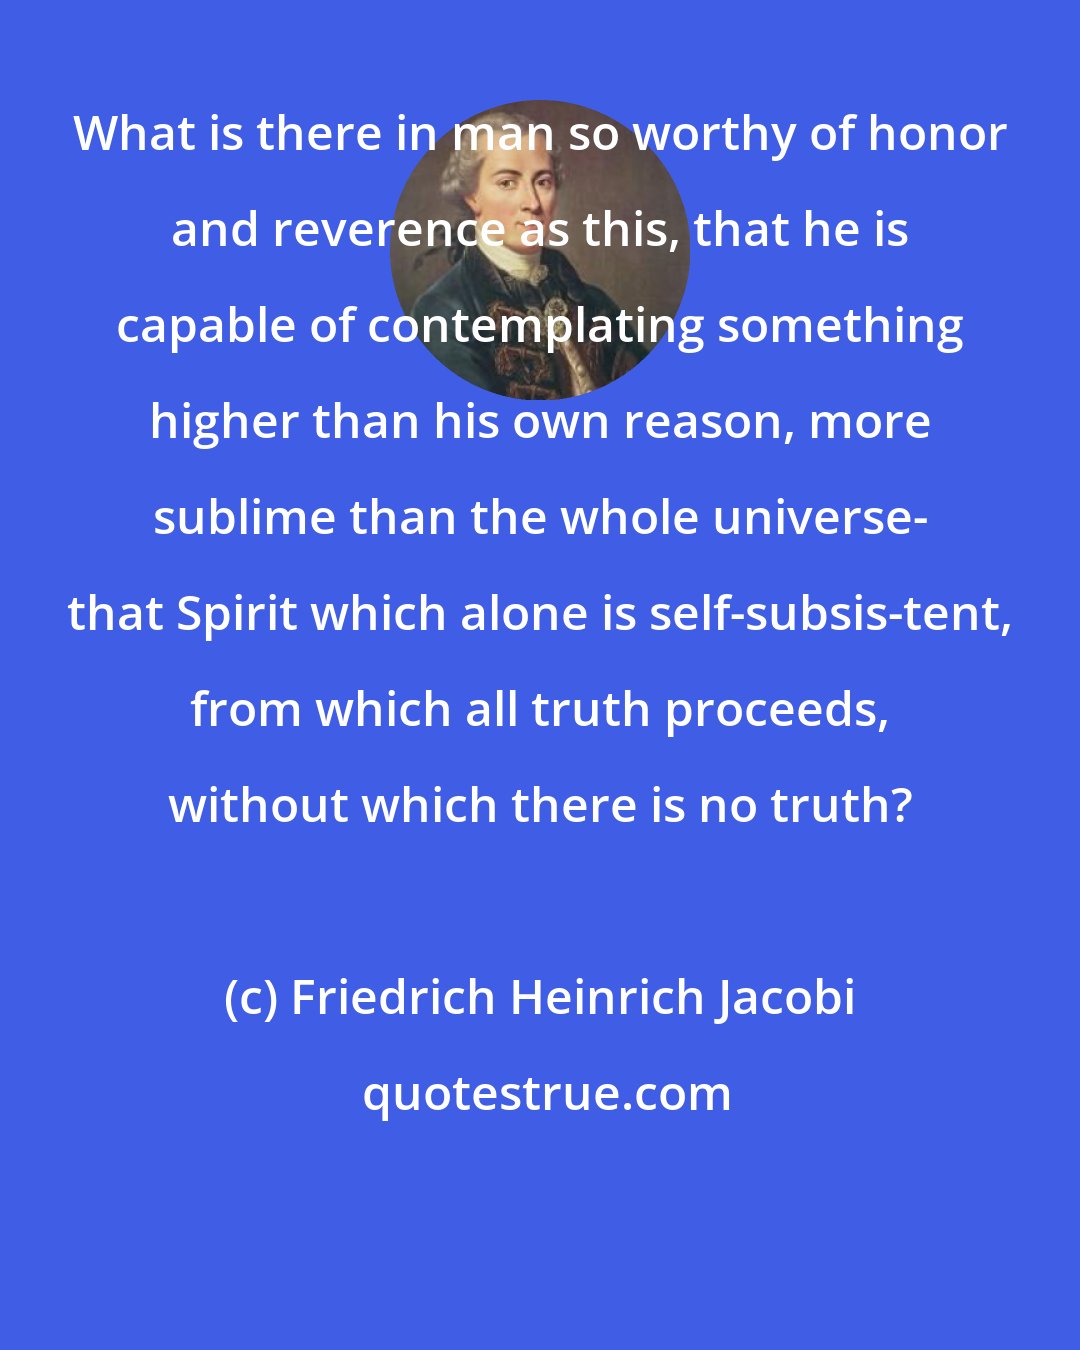 Friedrich Heinrich Jacobi: What is there in man so worthy of honor and reverence as this, that he is capable of contemplating something higher than his own reason, more sublime than the whole universe- that Spirit which alone is self-subsis-tent, from which all truth proceeds, without which there is no truth?